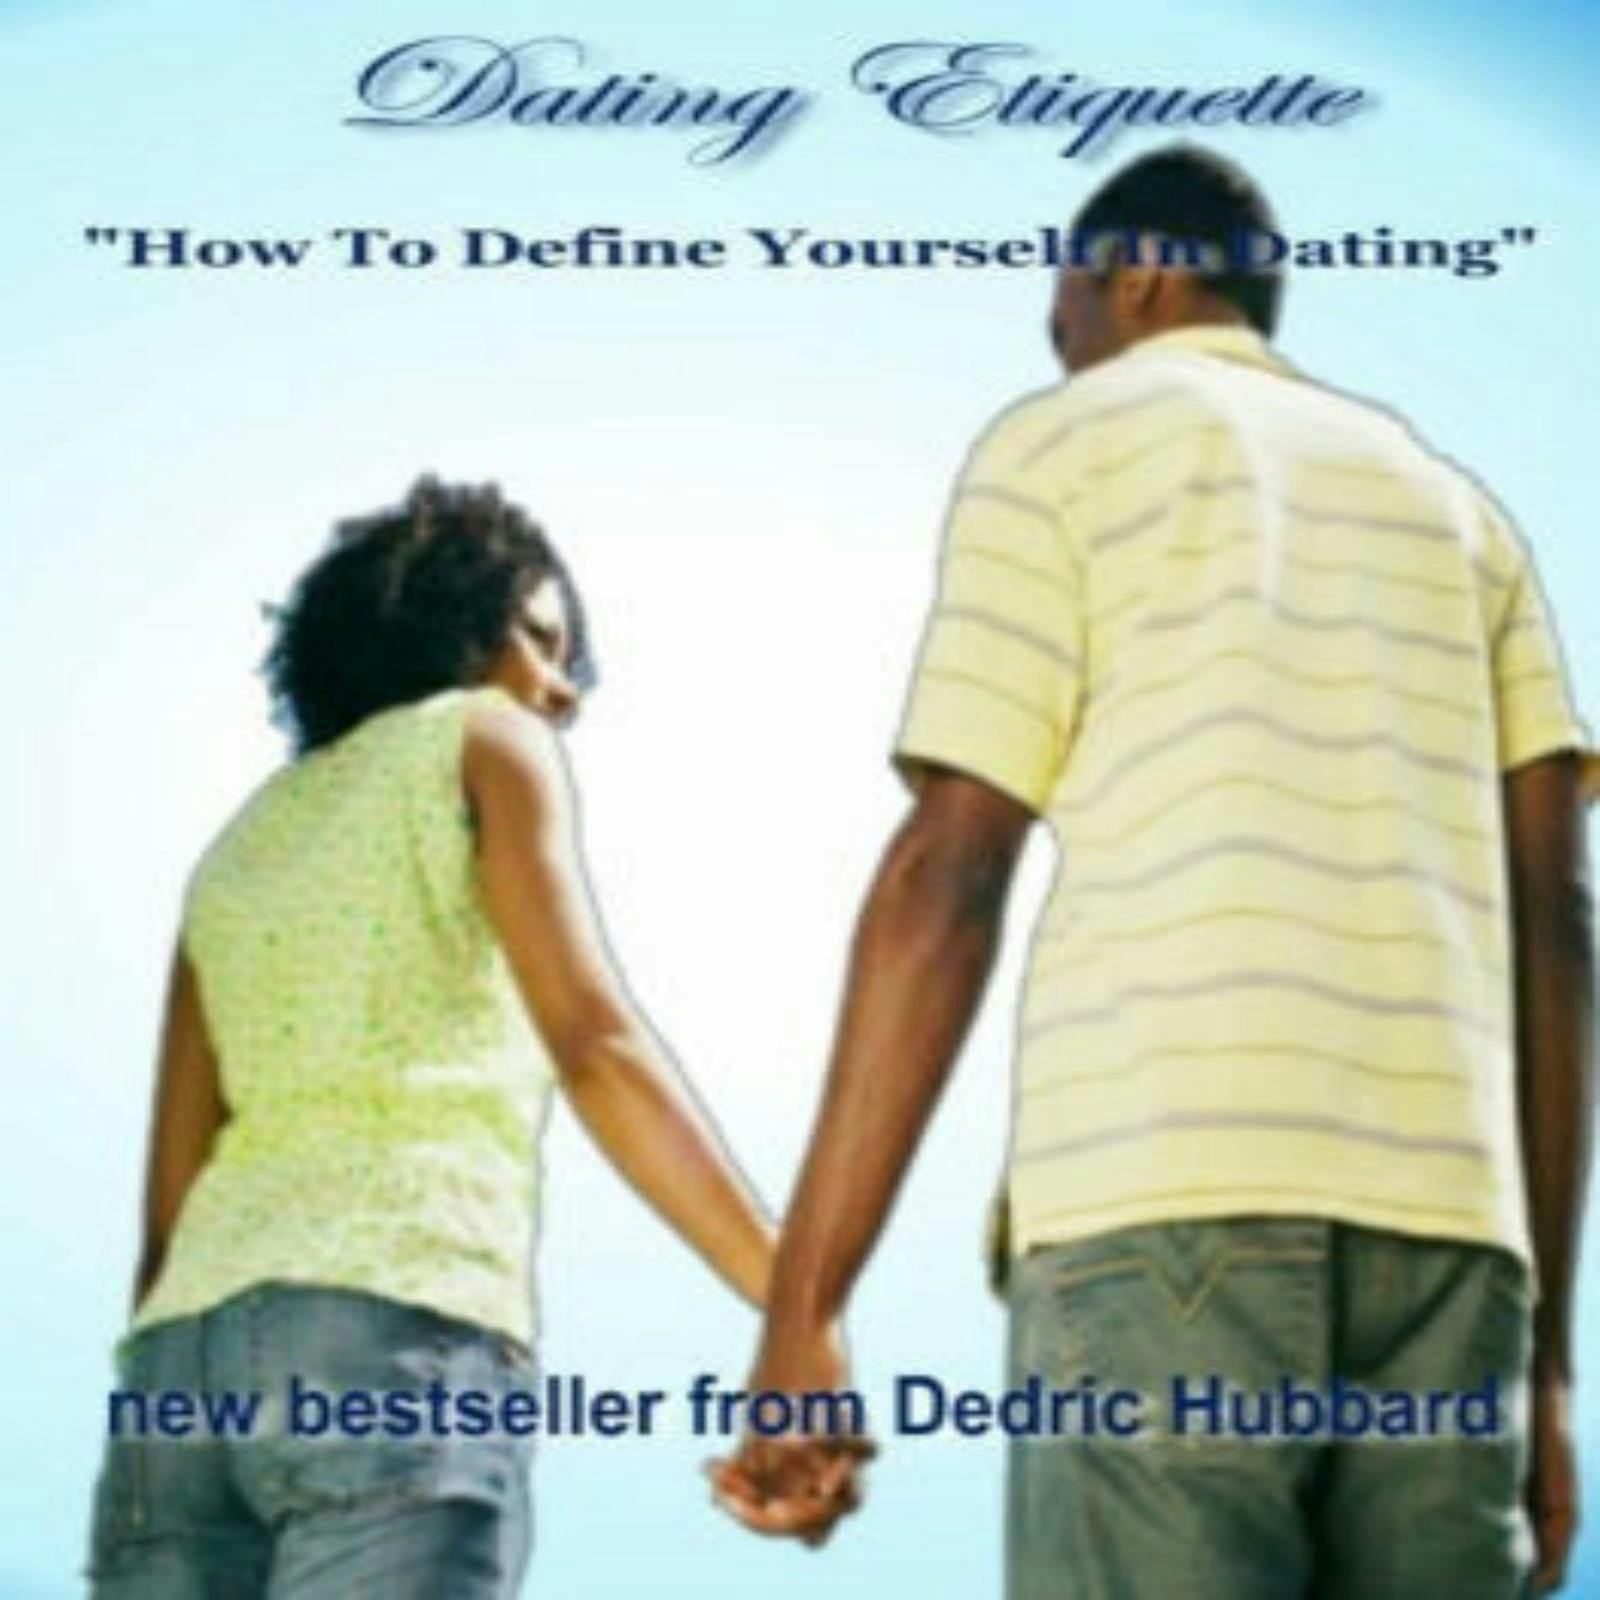 Dating Etiquette: How To Define Yourself In Dating - Dedric Hubbard